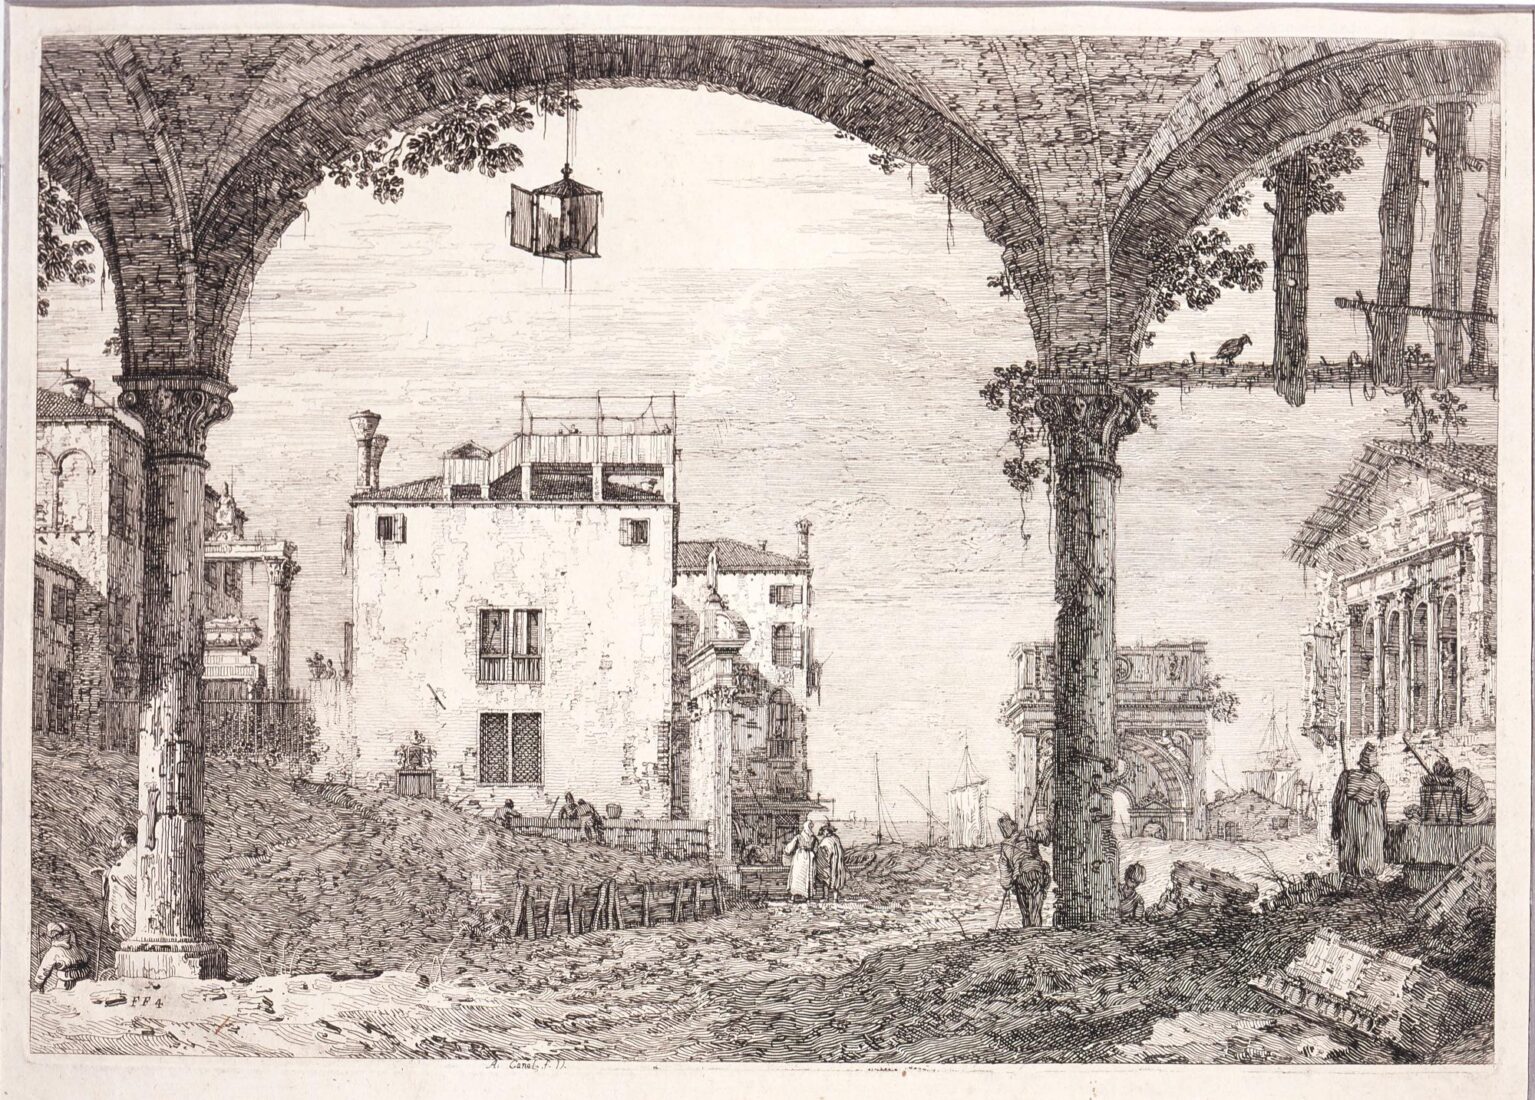 The portico with a lantern - Canal (Canaletto) Antonio